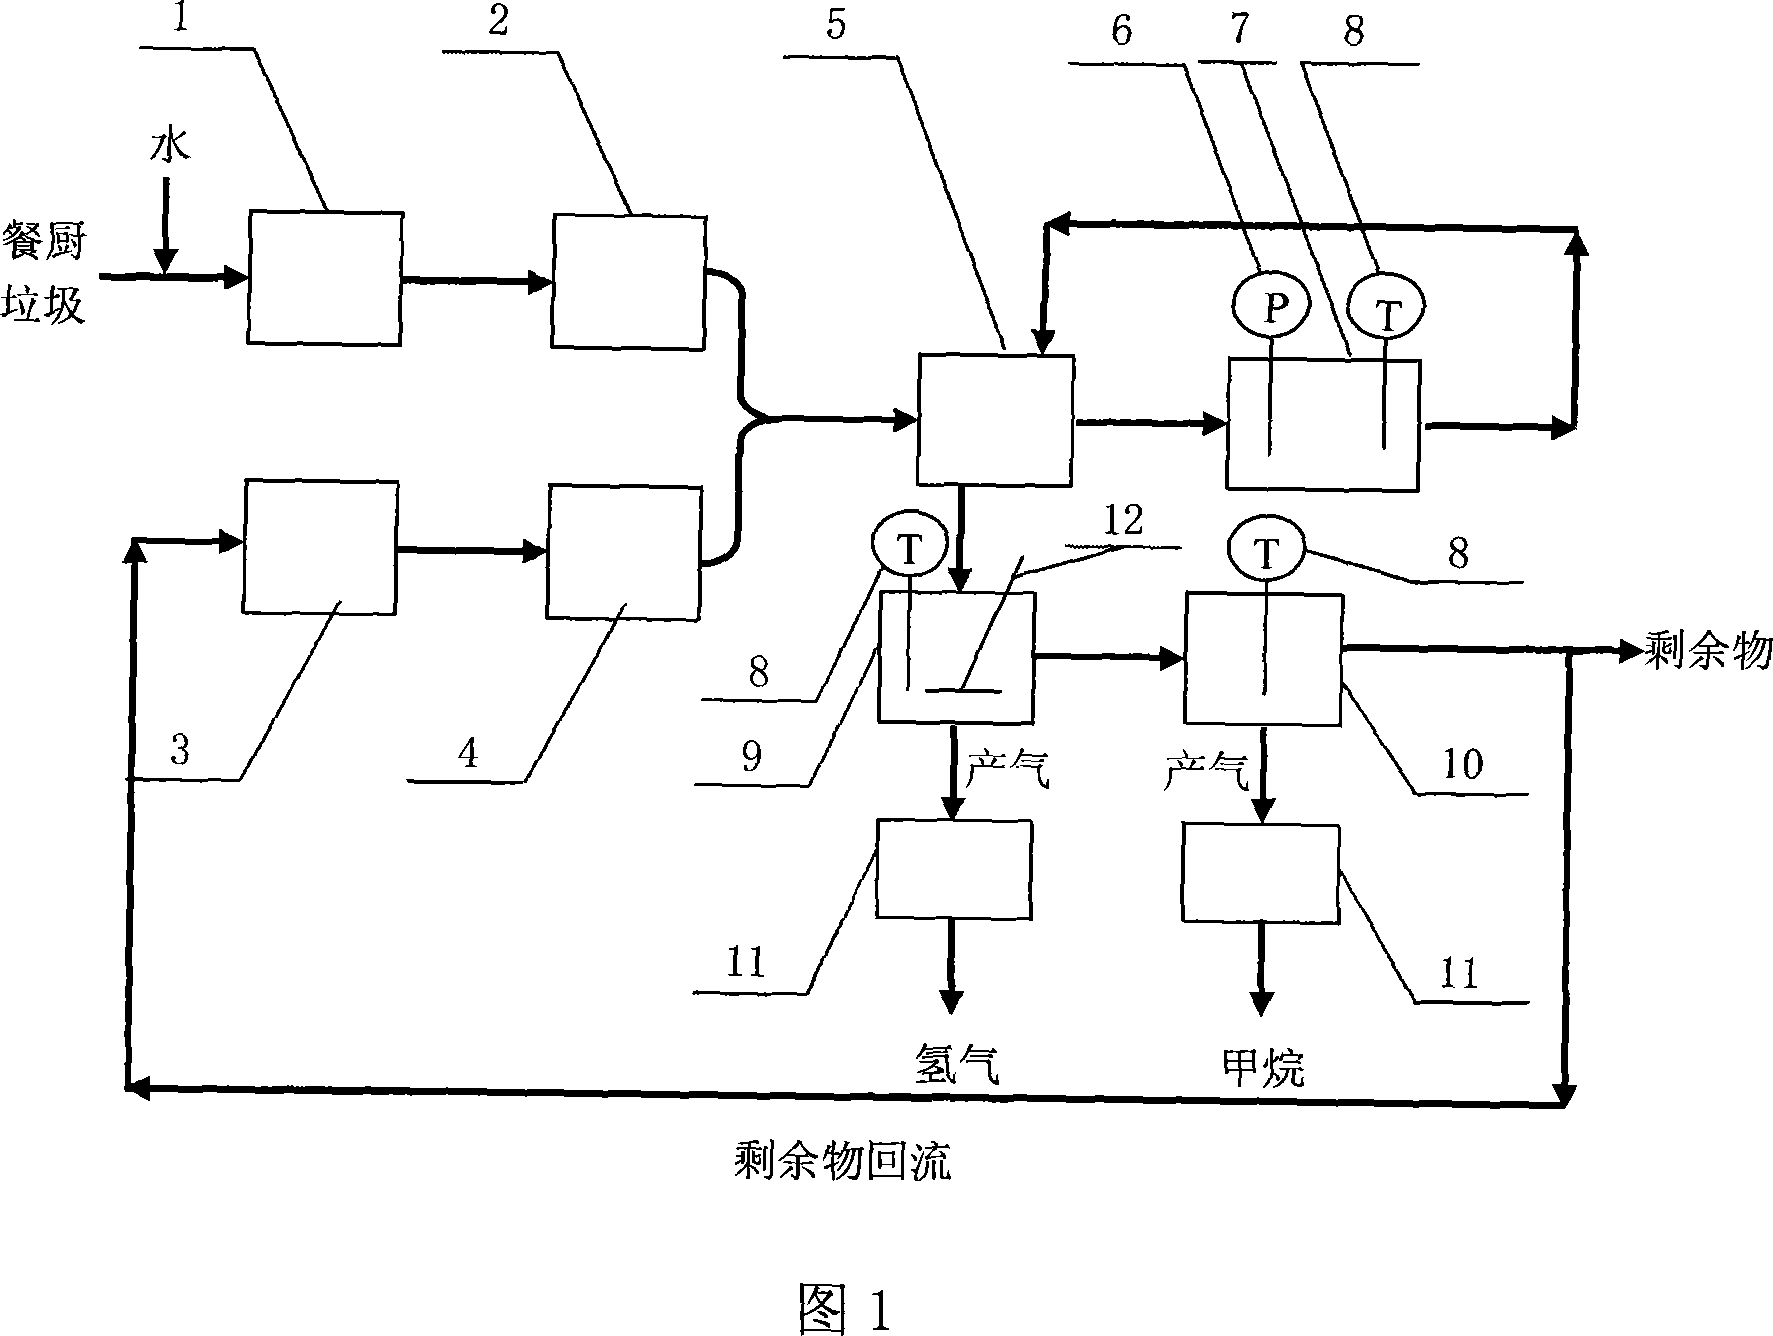 Method for producing hydrogen and methane by kitchen waste diphasic anaerobic fermentation